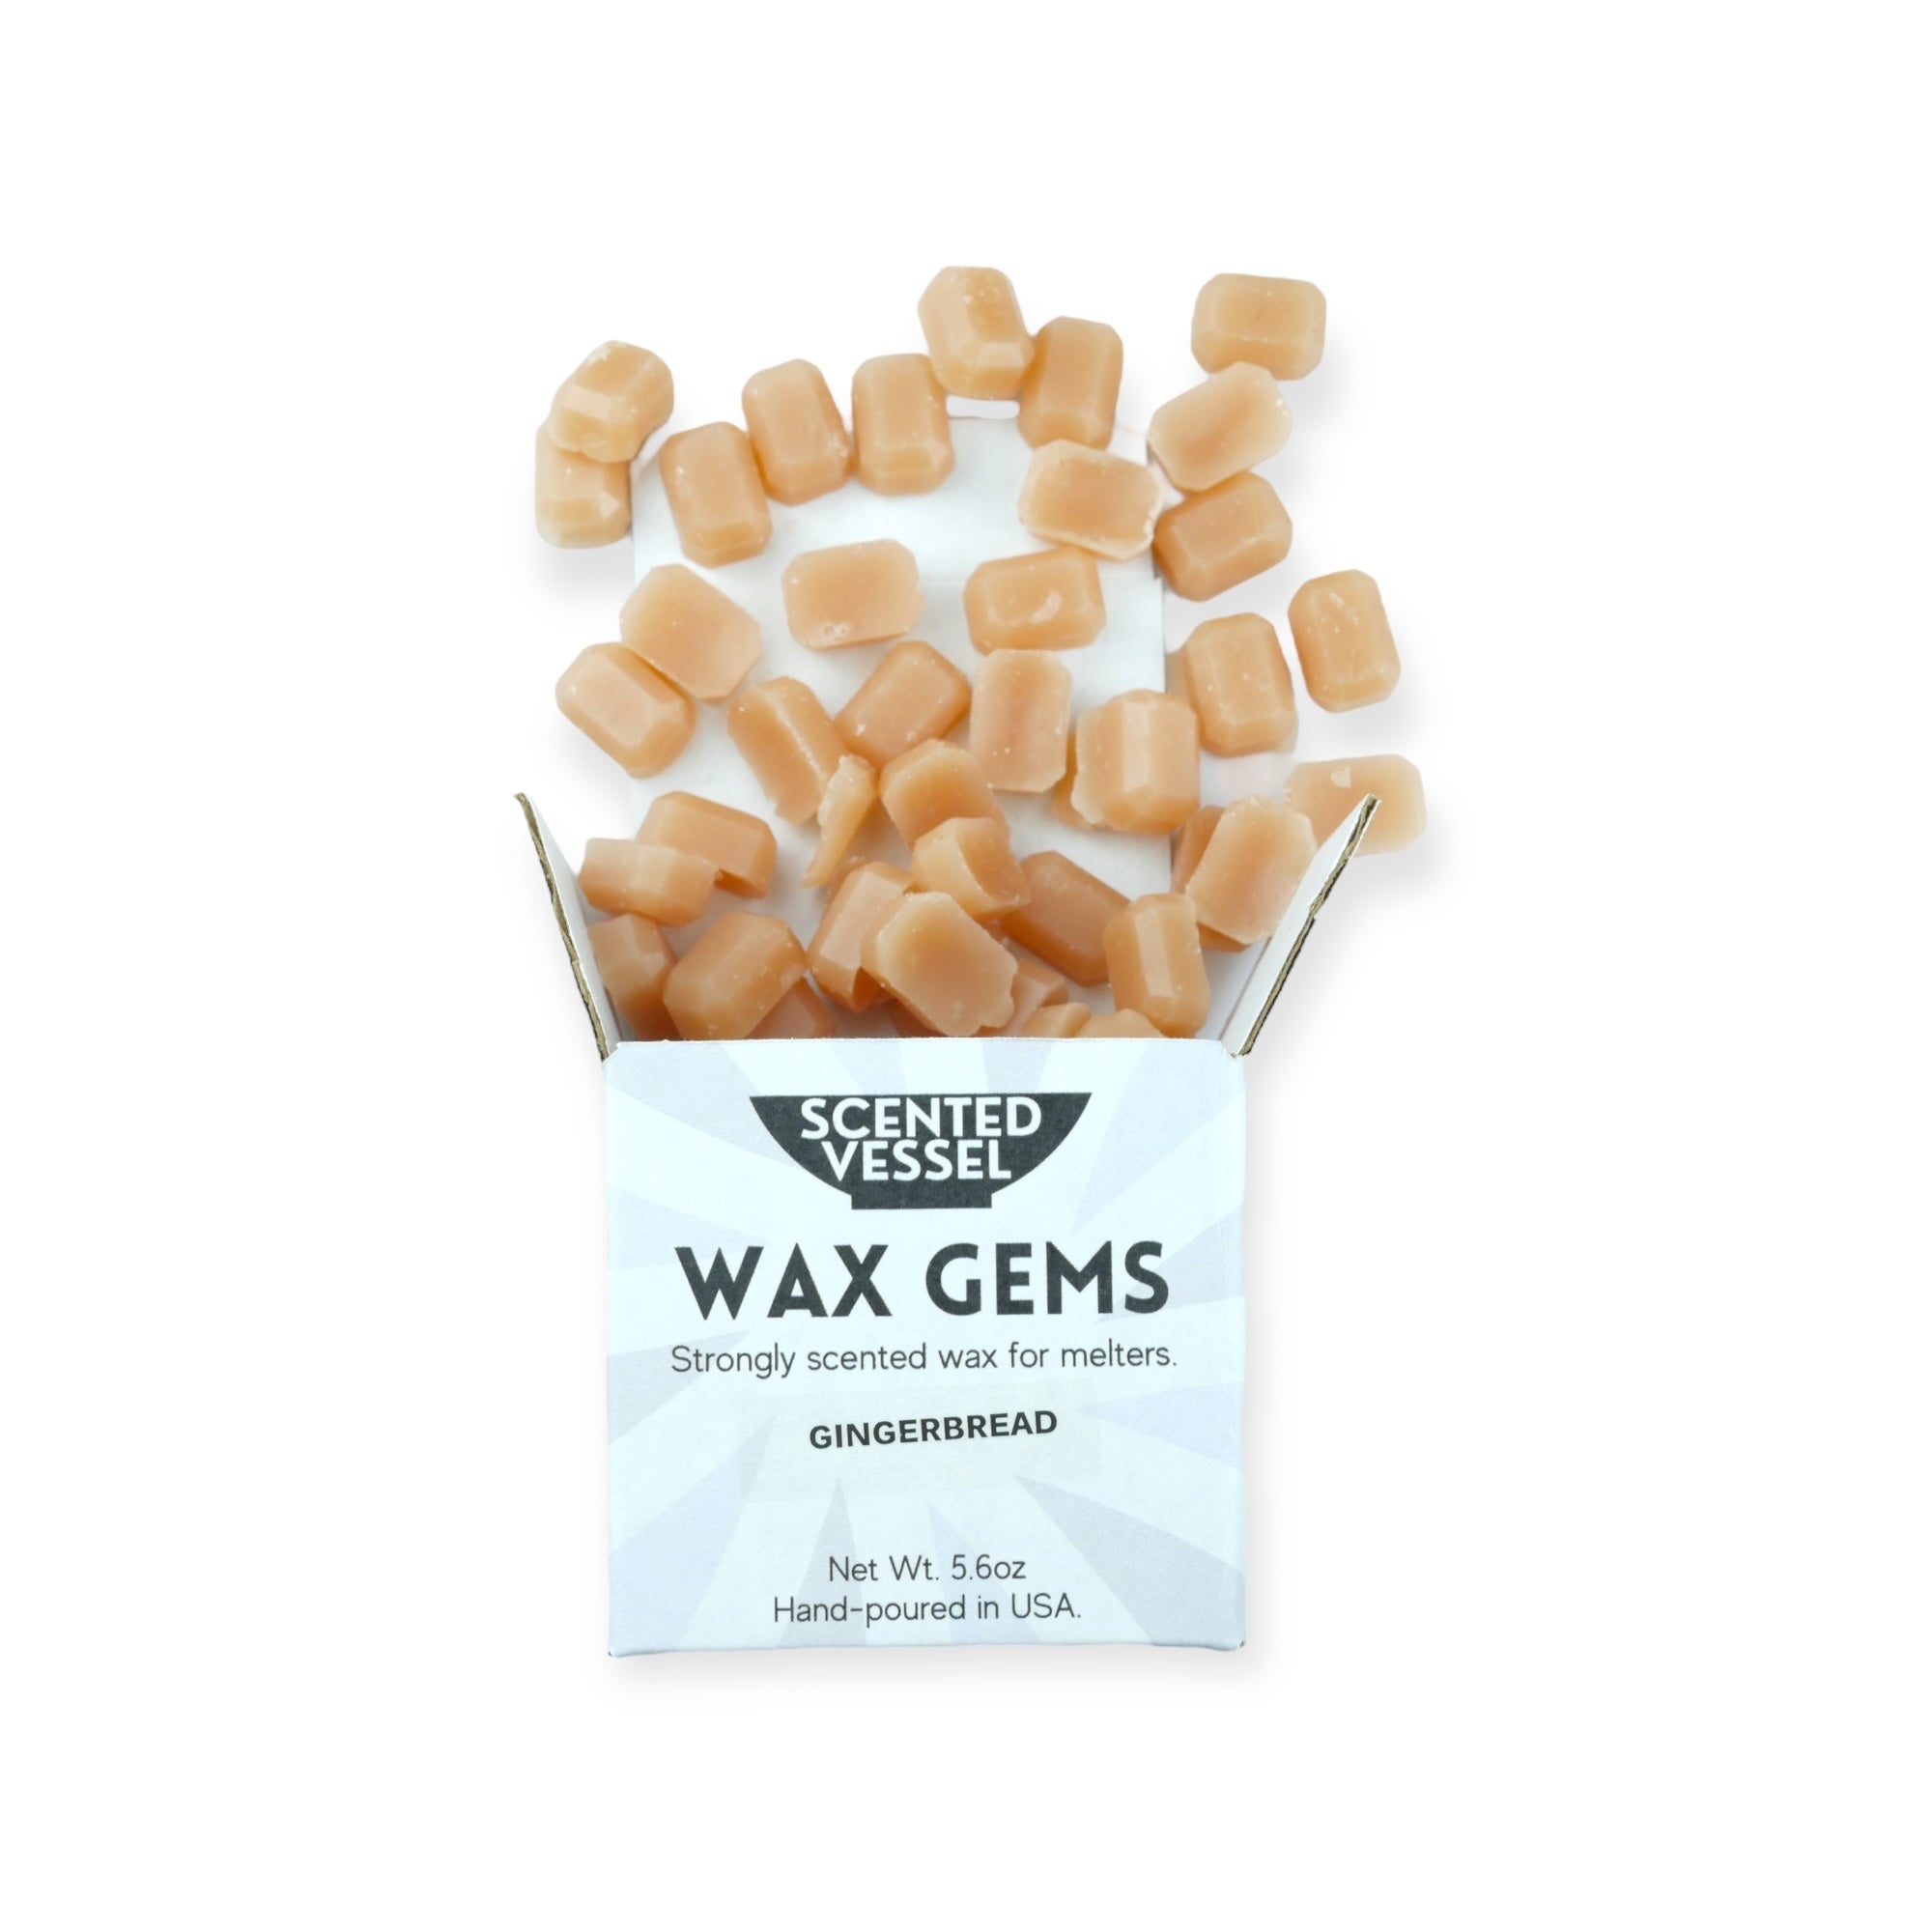 Gingerbread 5.6oz Wax Gems by Scented Vessel